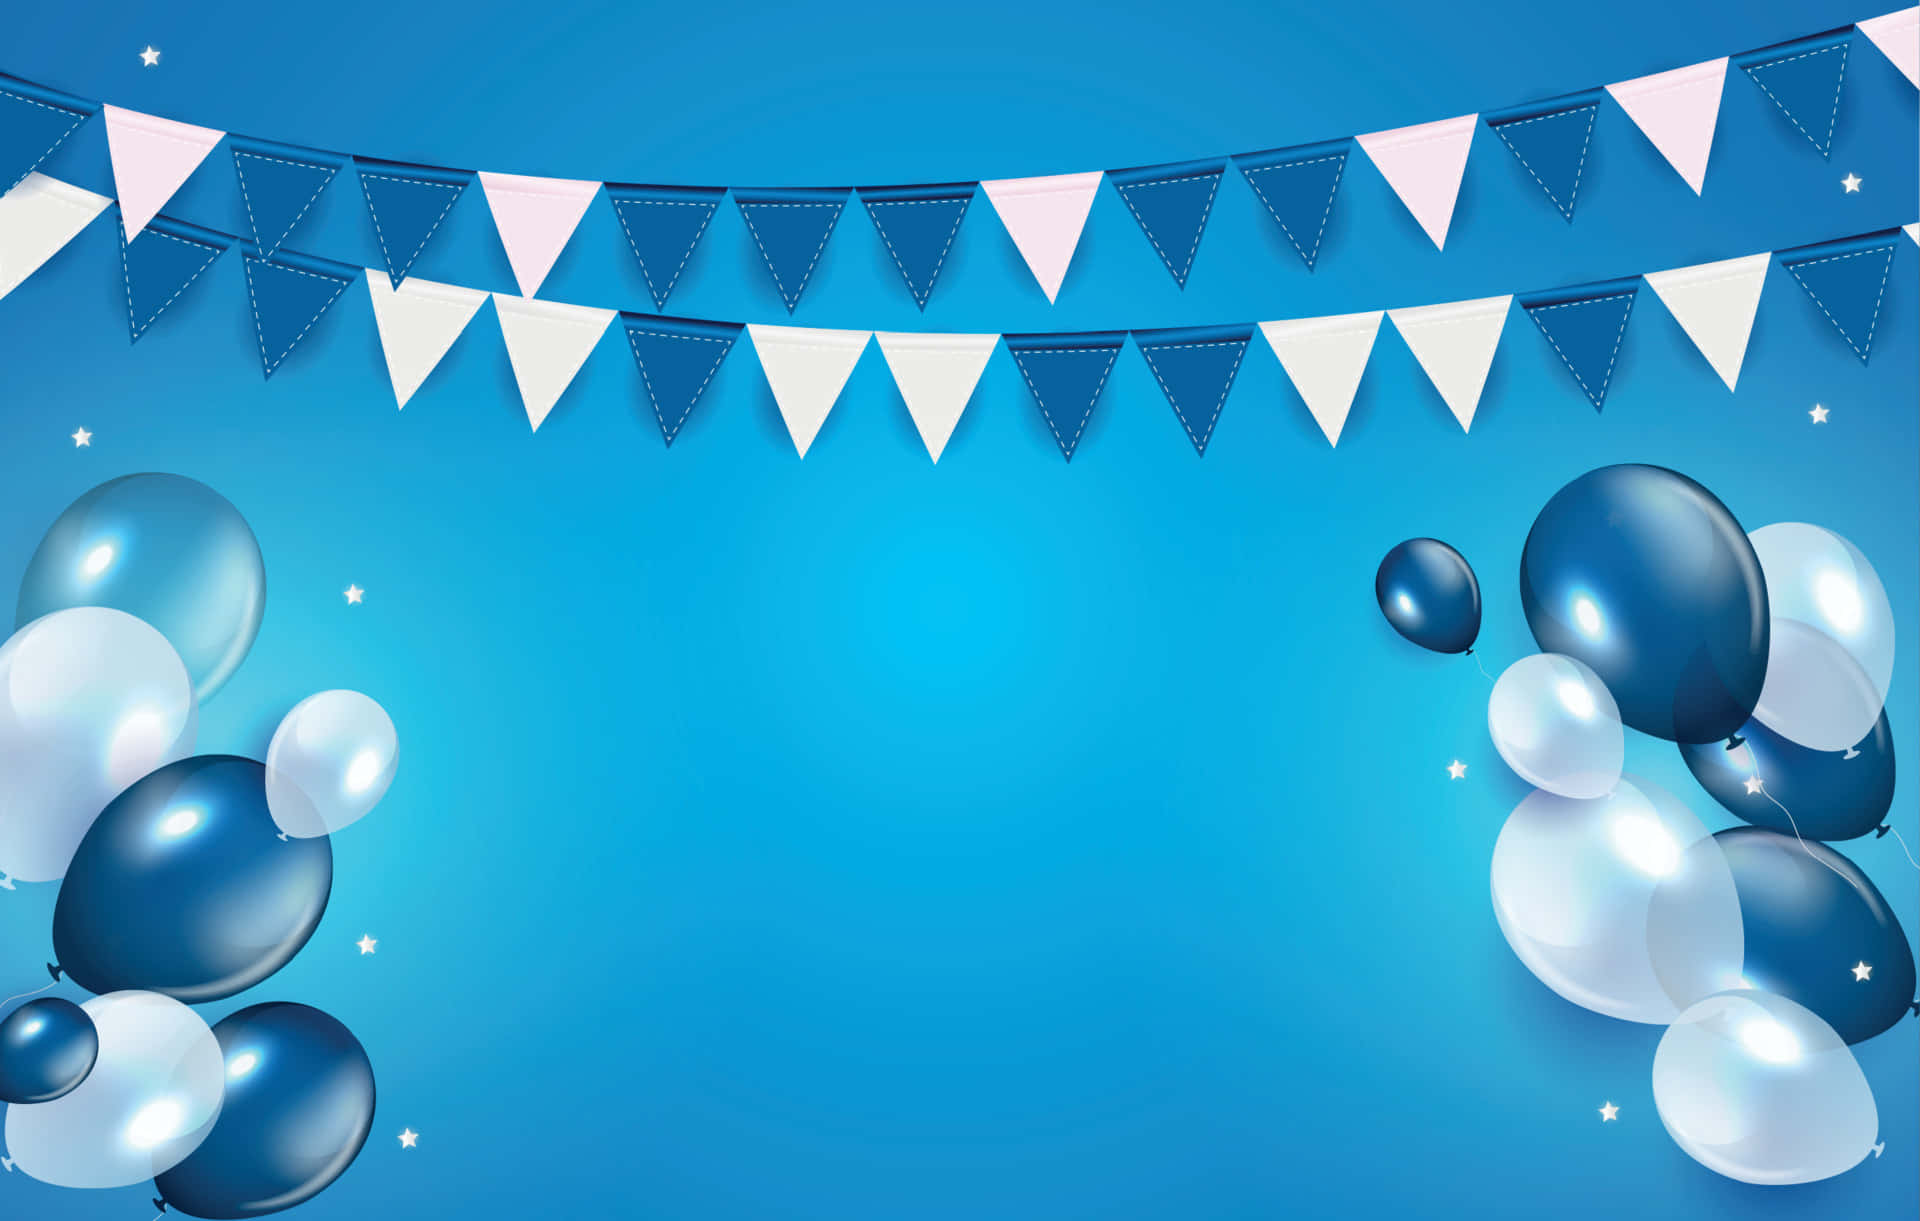 Blue Balloons And Bunting On A Blue Background